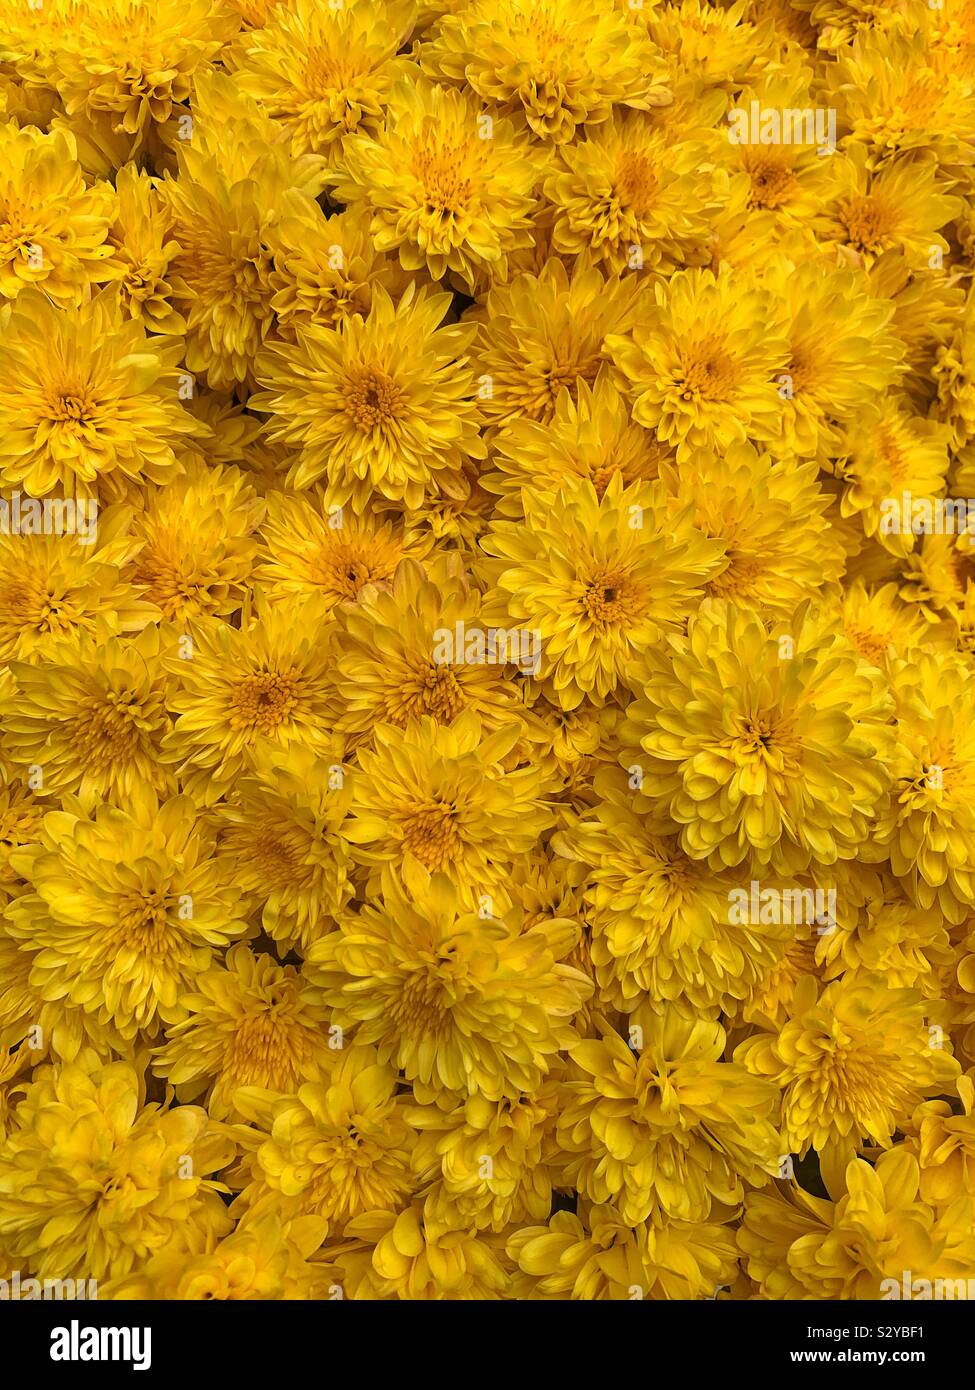 Full frame of beautiful yellow mums blossoms in full bloom Stock Photo